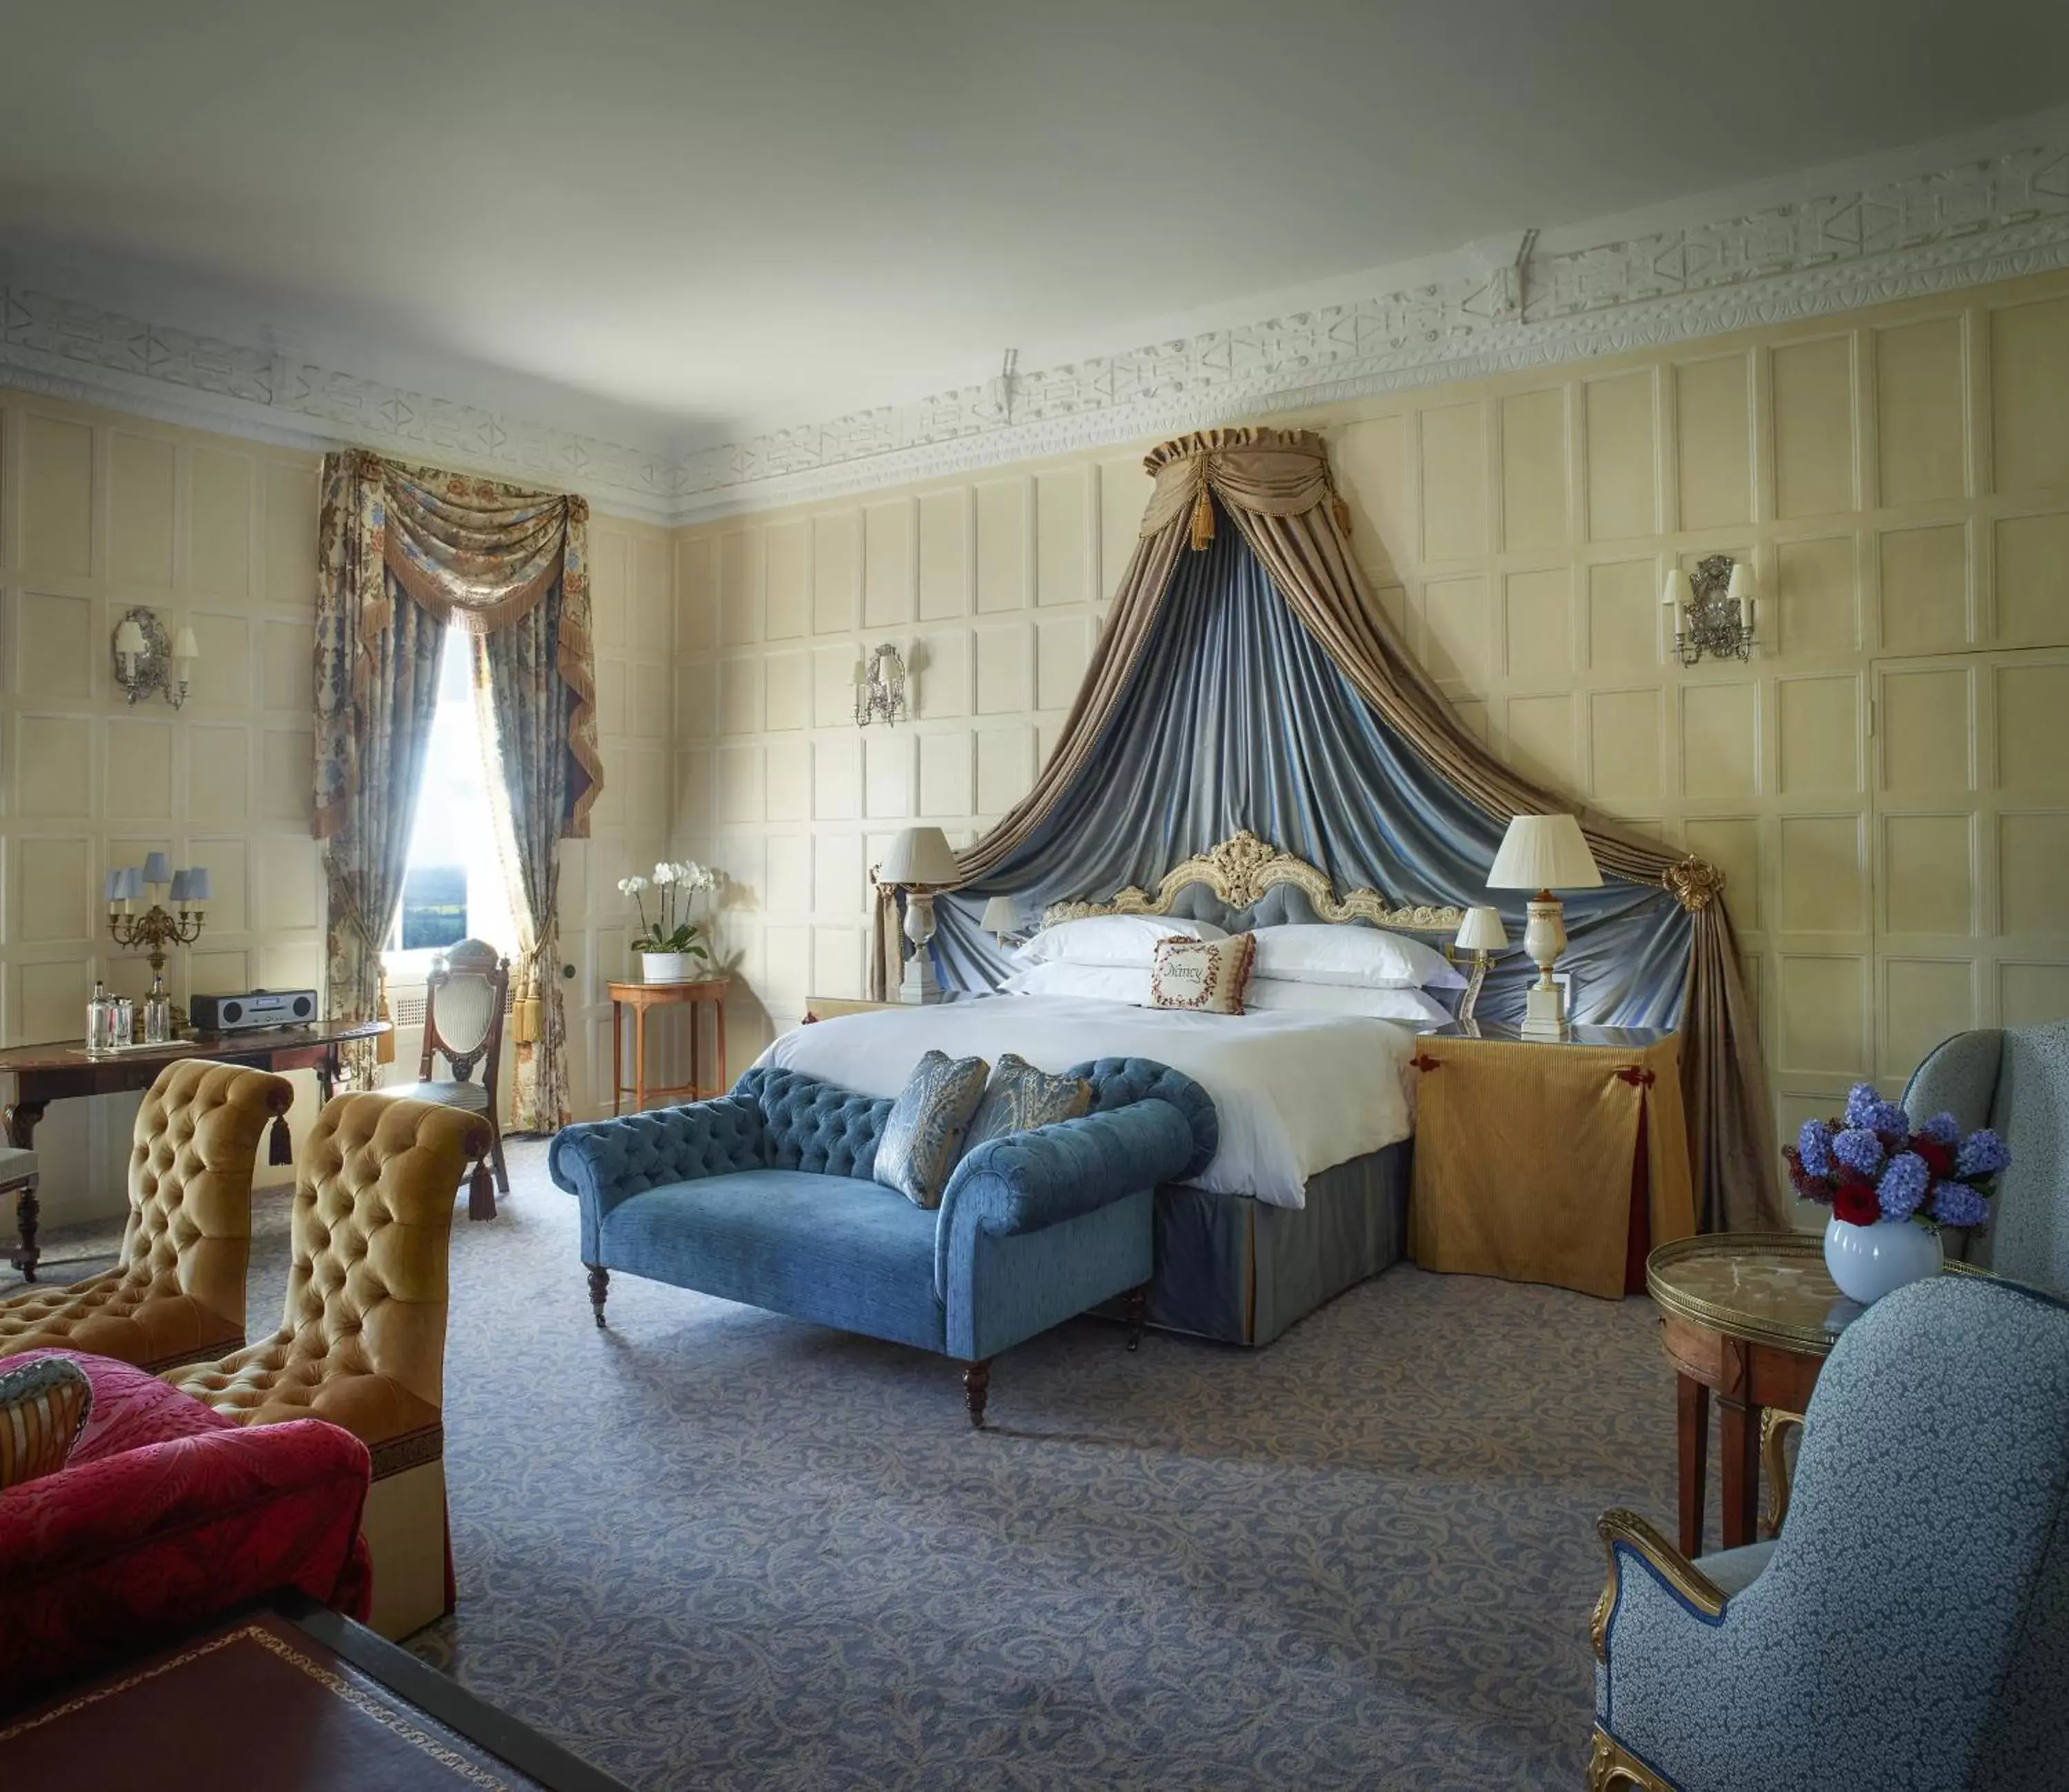 Lady Astor Suite in Cliveden House - an Iconic Luxury Hotel